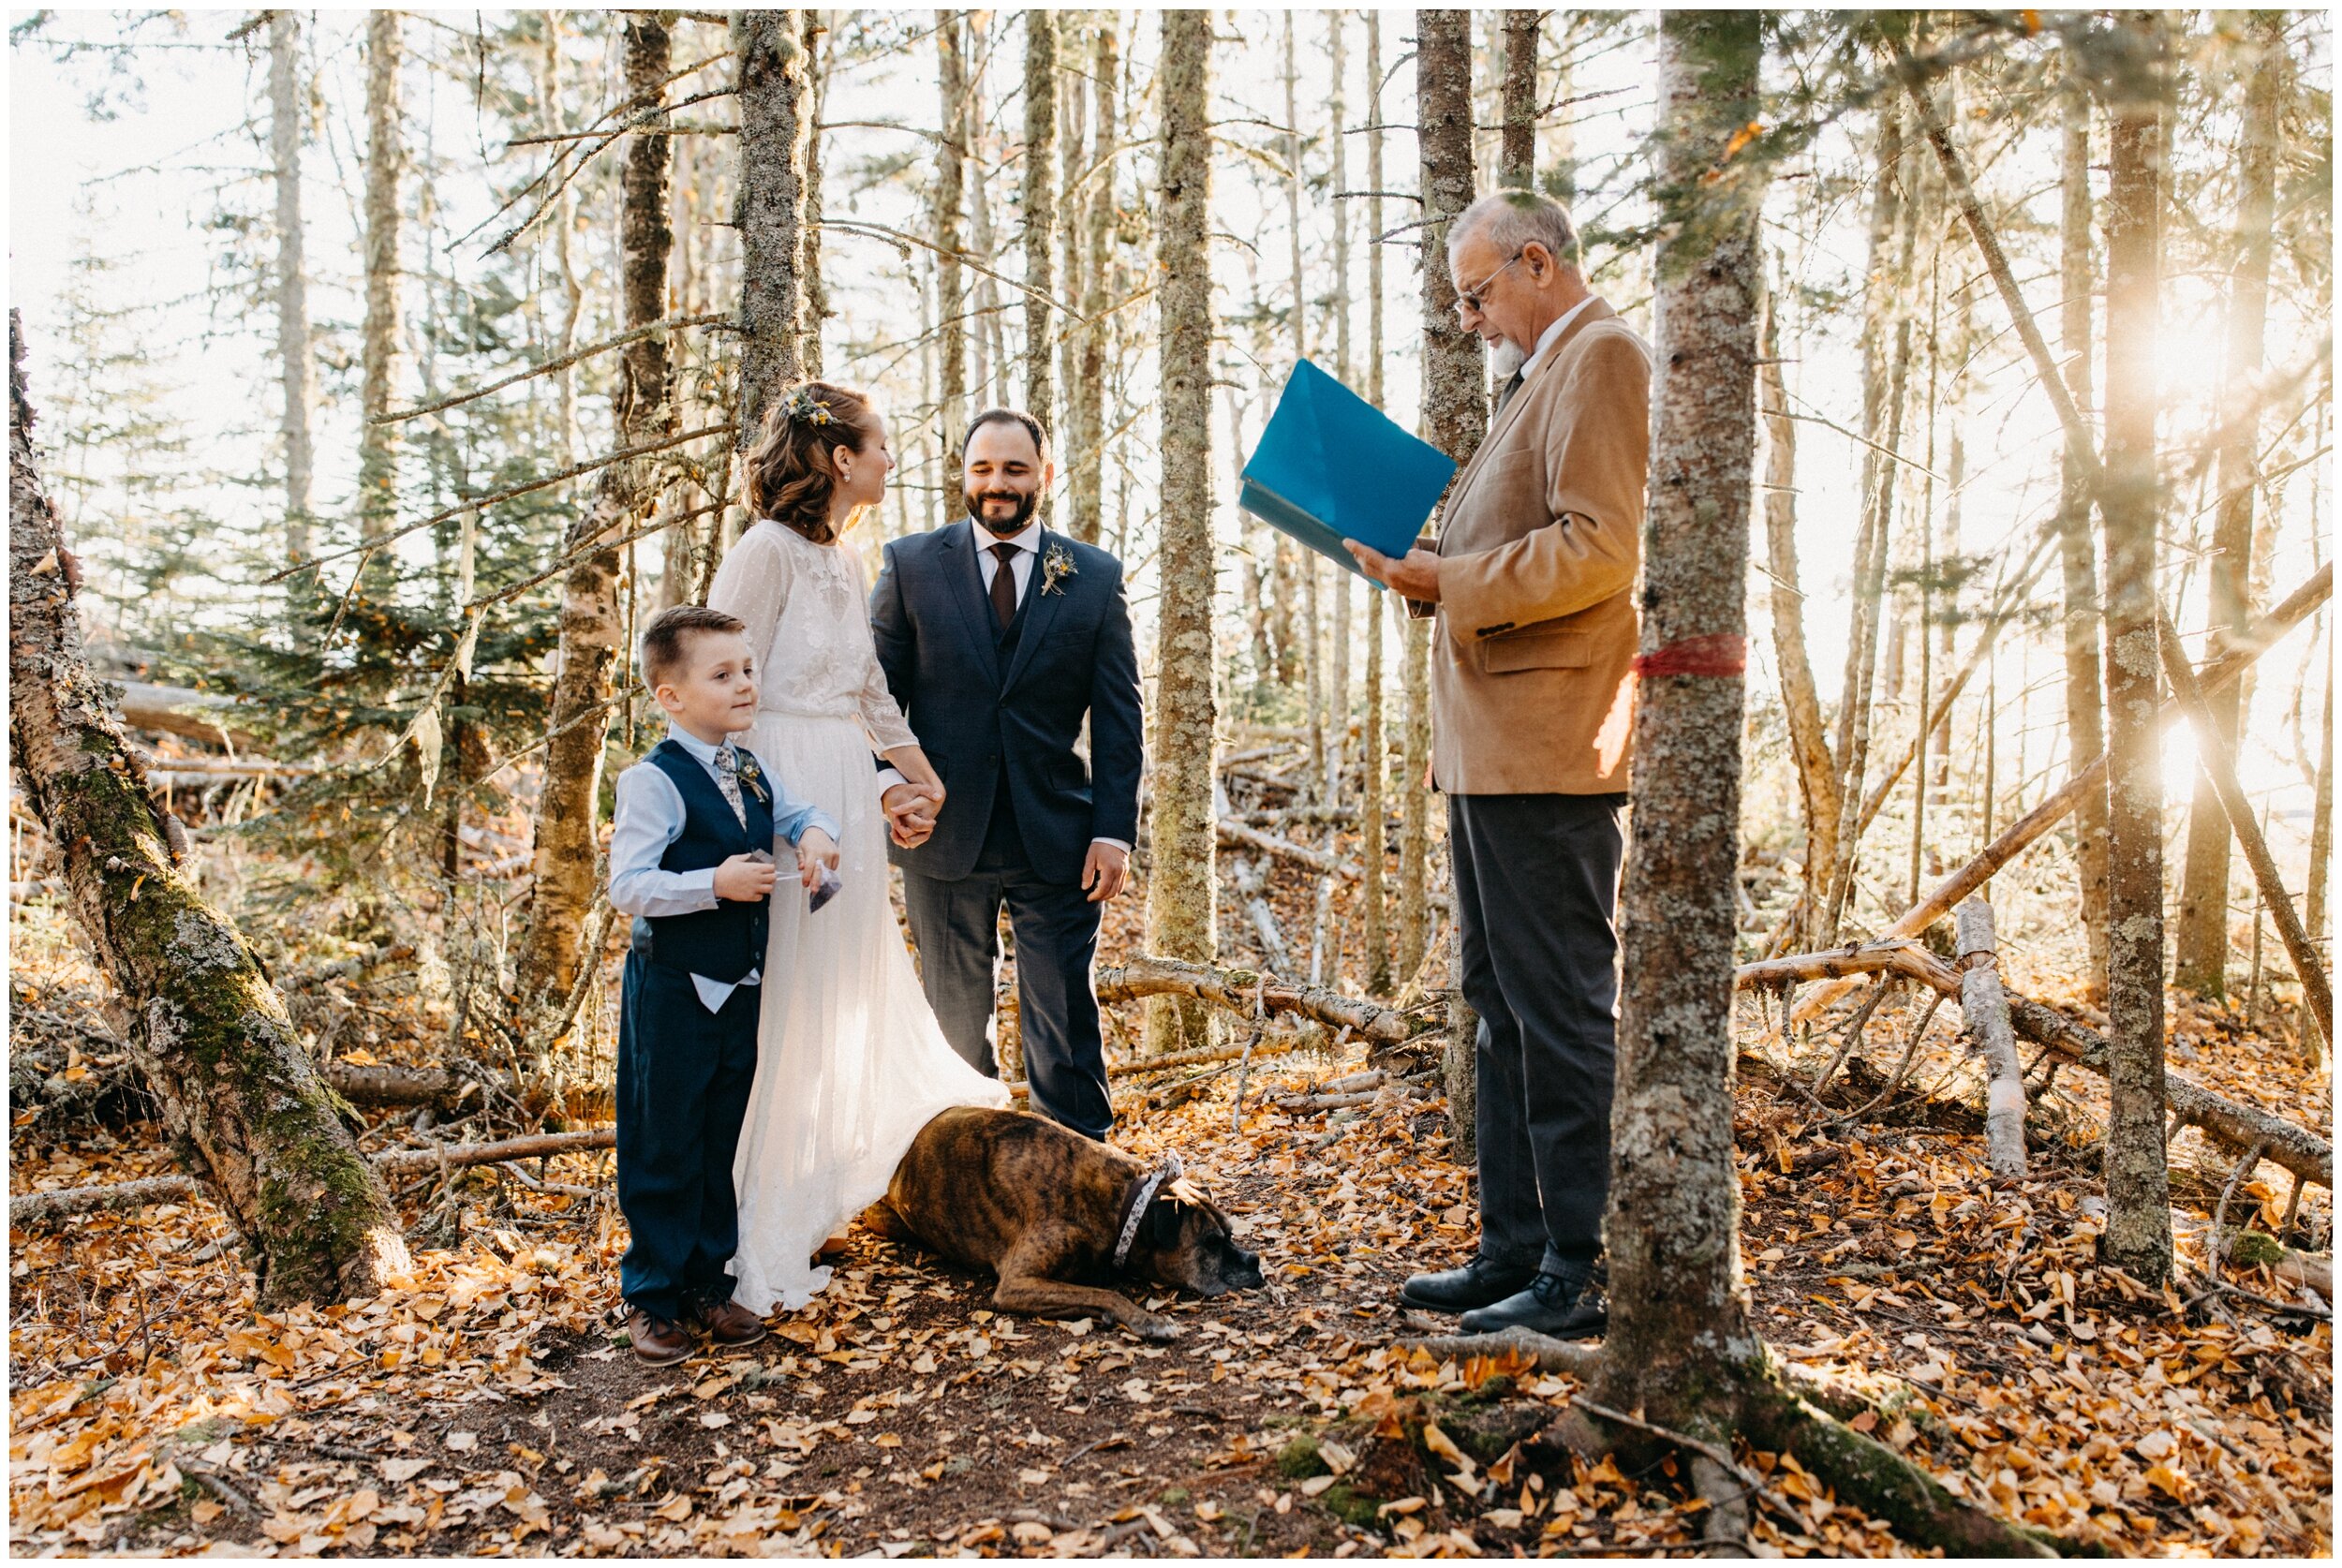 Intimate wedding ceremony in the woods on Artists' Point during sunset in Grand Marais, Minnesota